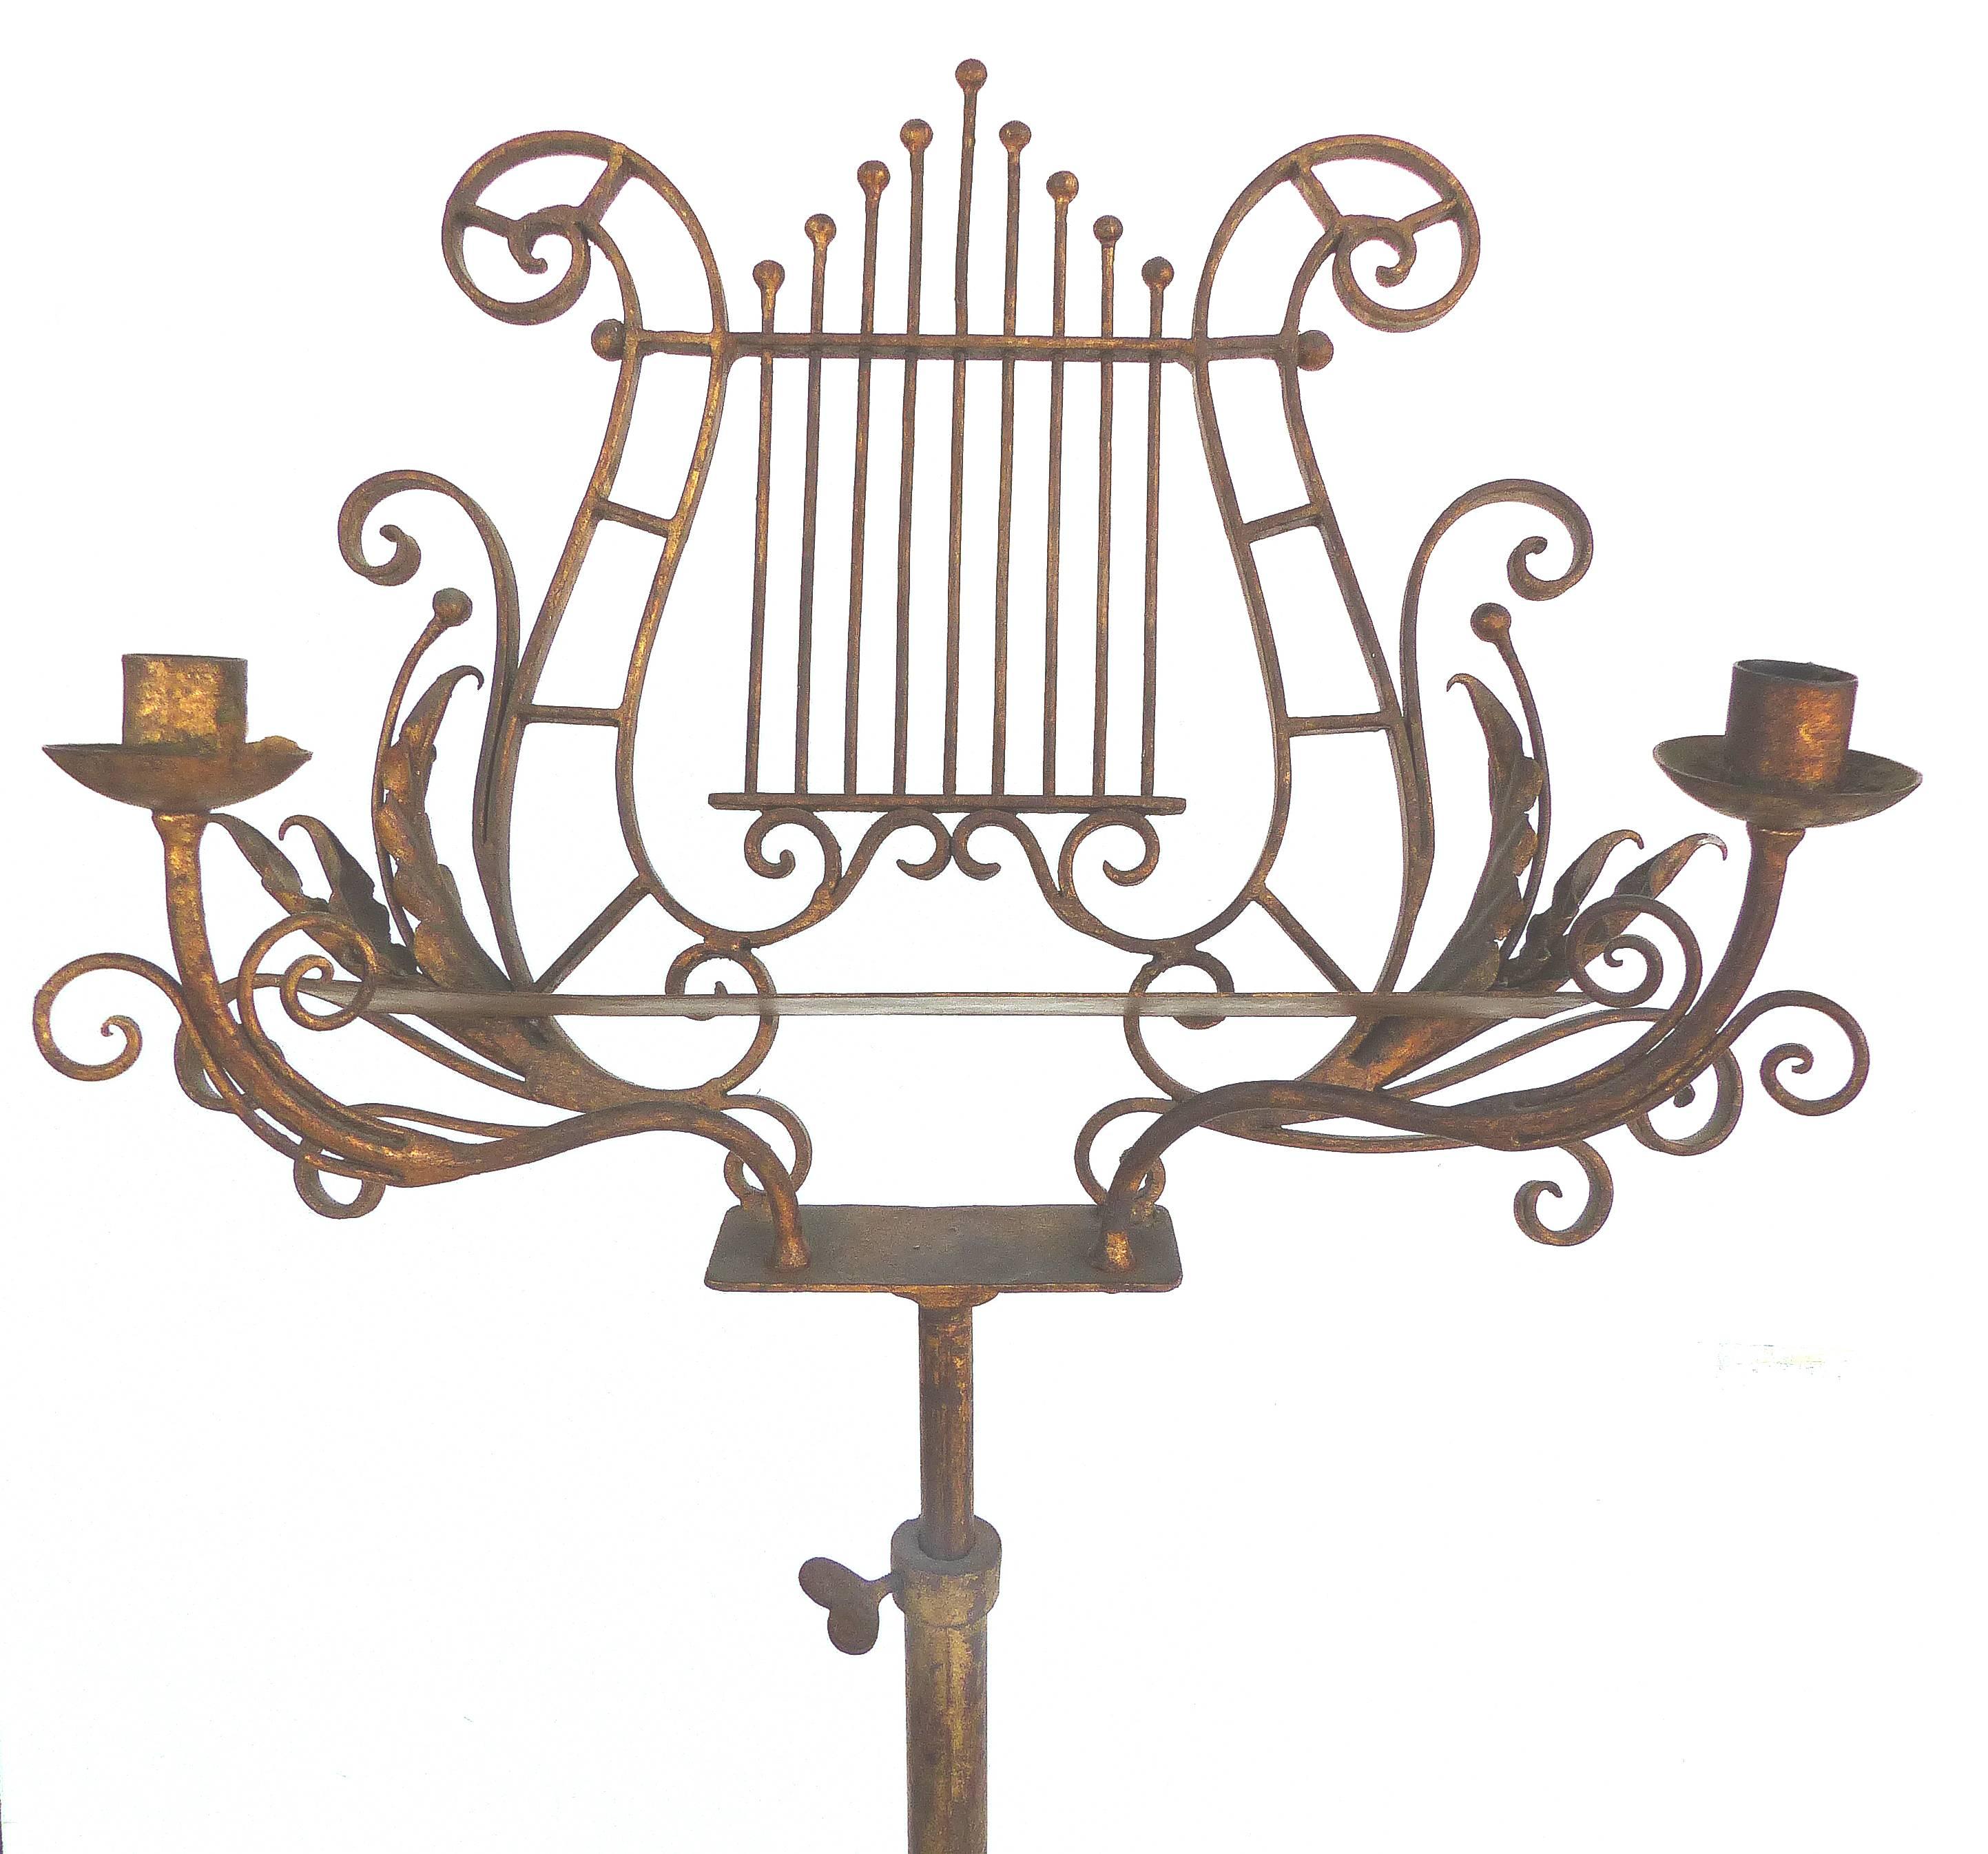 Offered is an adjustable gilt iron music stand having a lyre shaped pedestal base. This piece is from a prominent Coconut Grove, Florida estate of the Lily pharmaceutical family which was designed by Paul Chaflin, the same designer as the Vizcaya